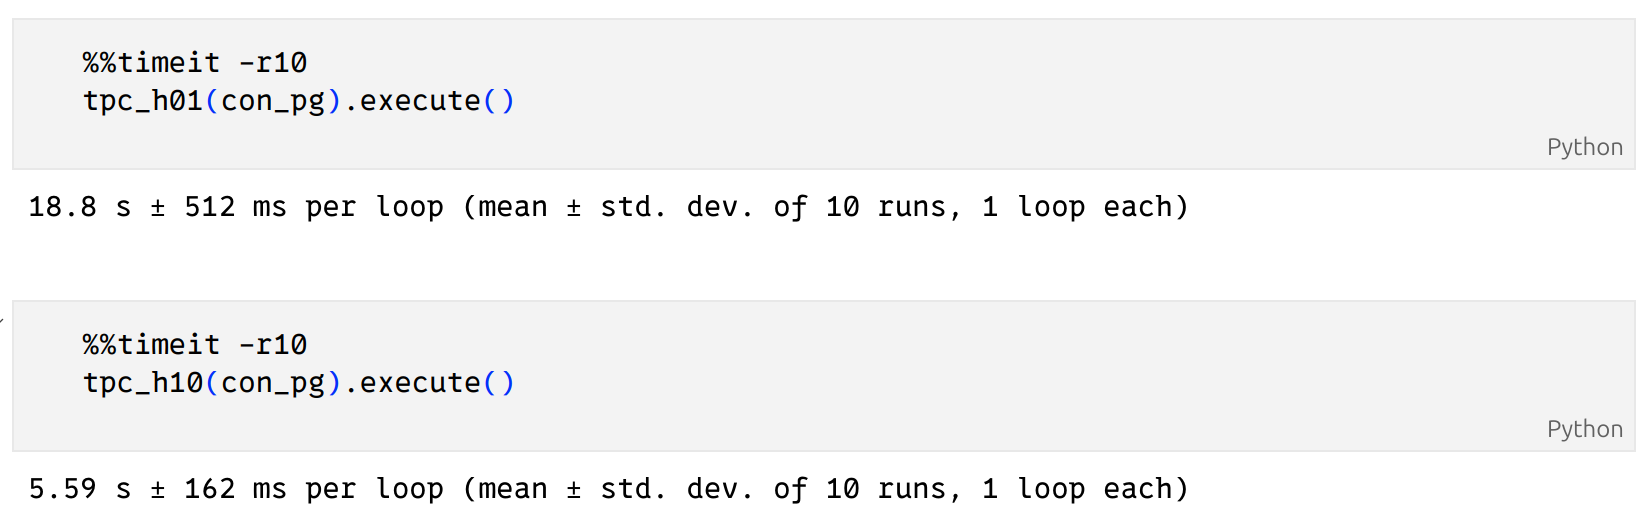 screenshot showing the results of running the tpc_h01 and tpch_h10 functions using the Postgres backend: means 18.8 seconds and 5.59 seconds respectively.